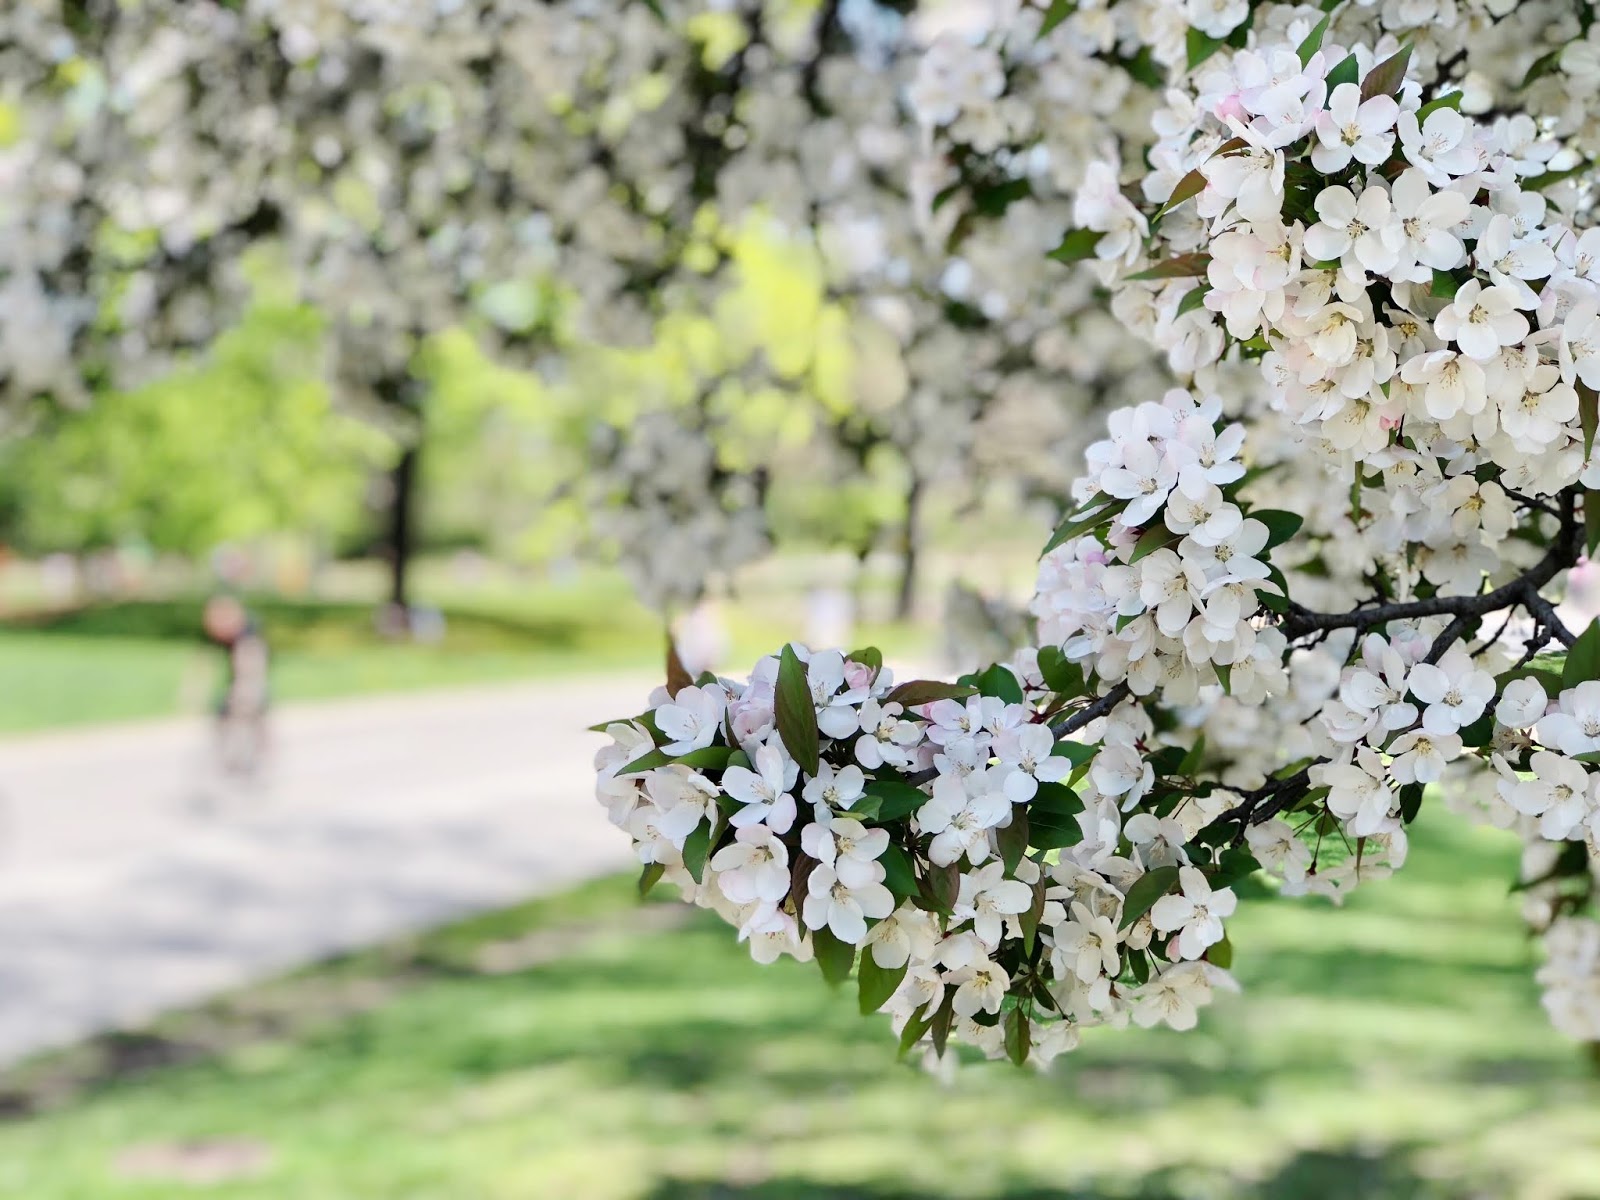 Flowers in Central Park, Spring 2018, New York City, Photos by Jessica Marie Kelley